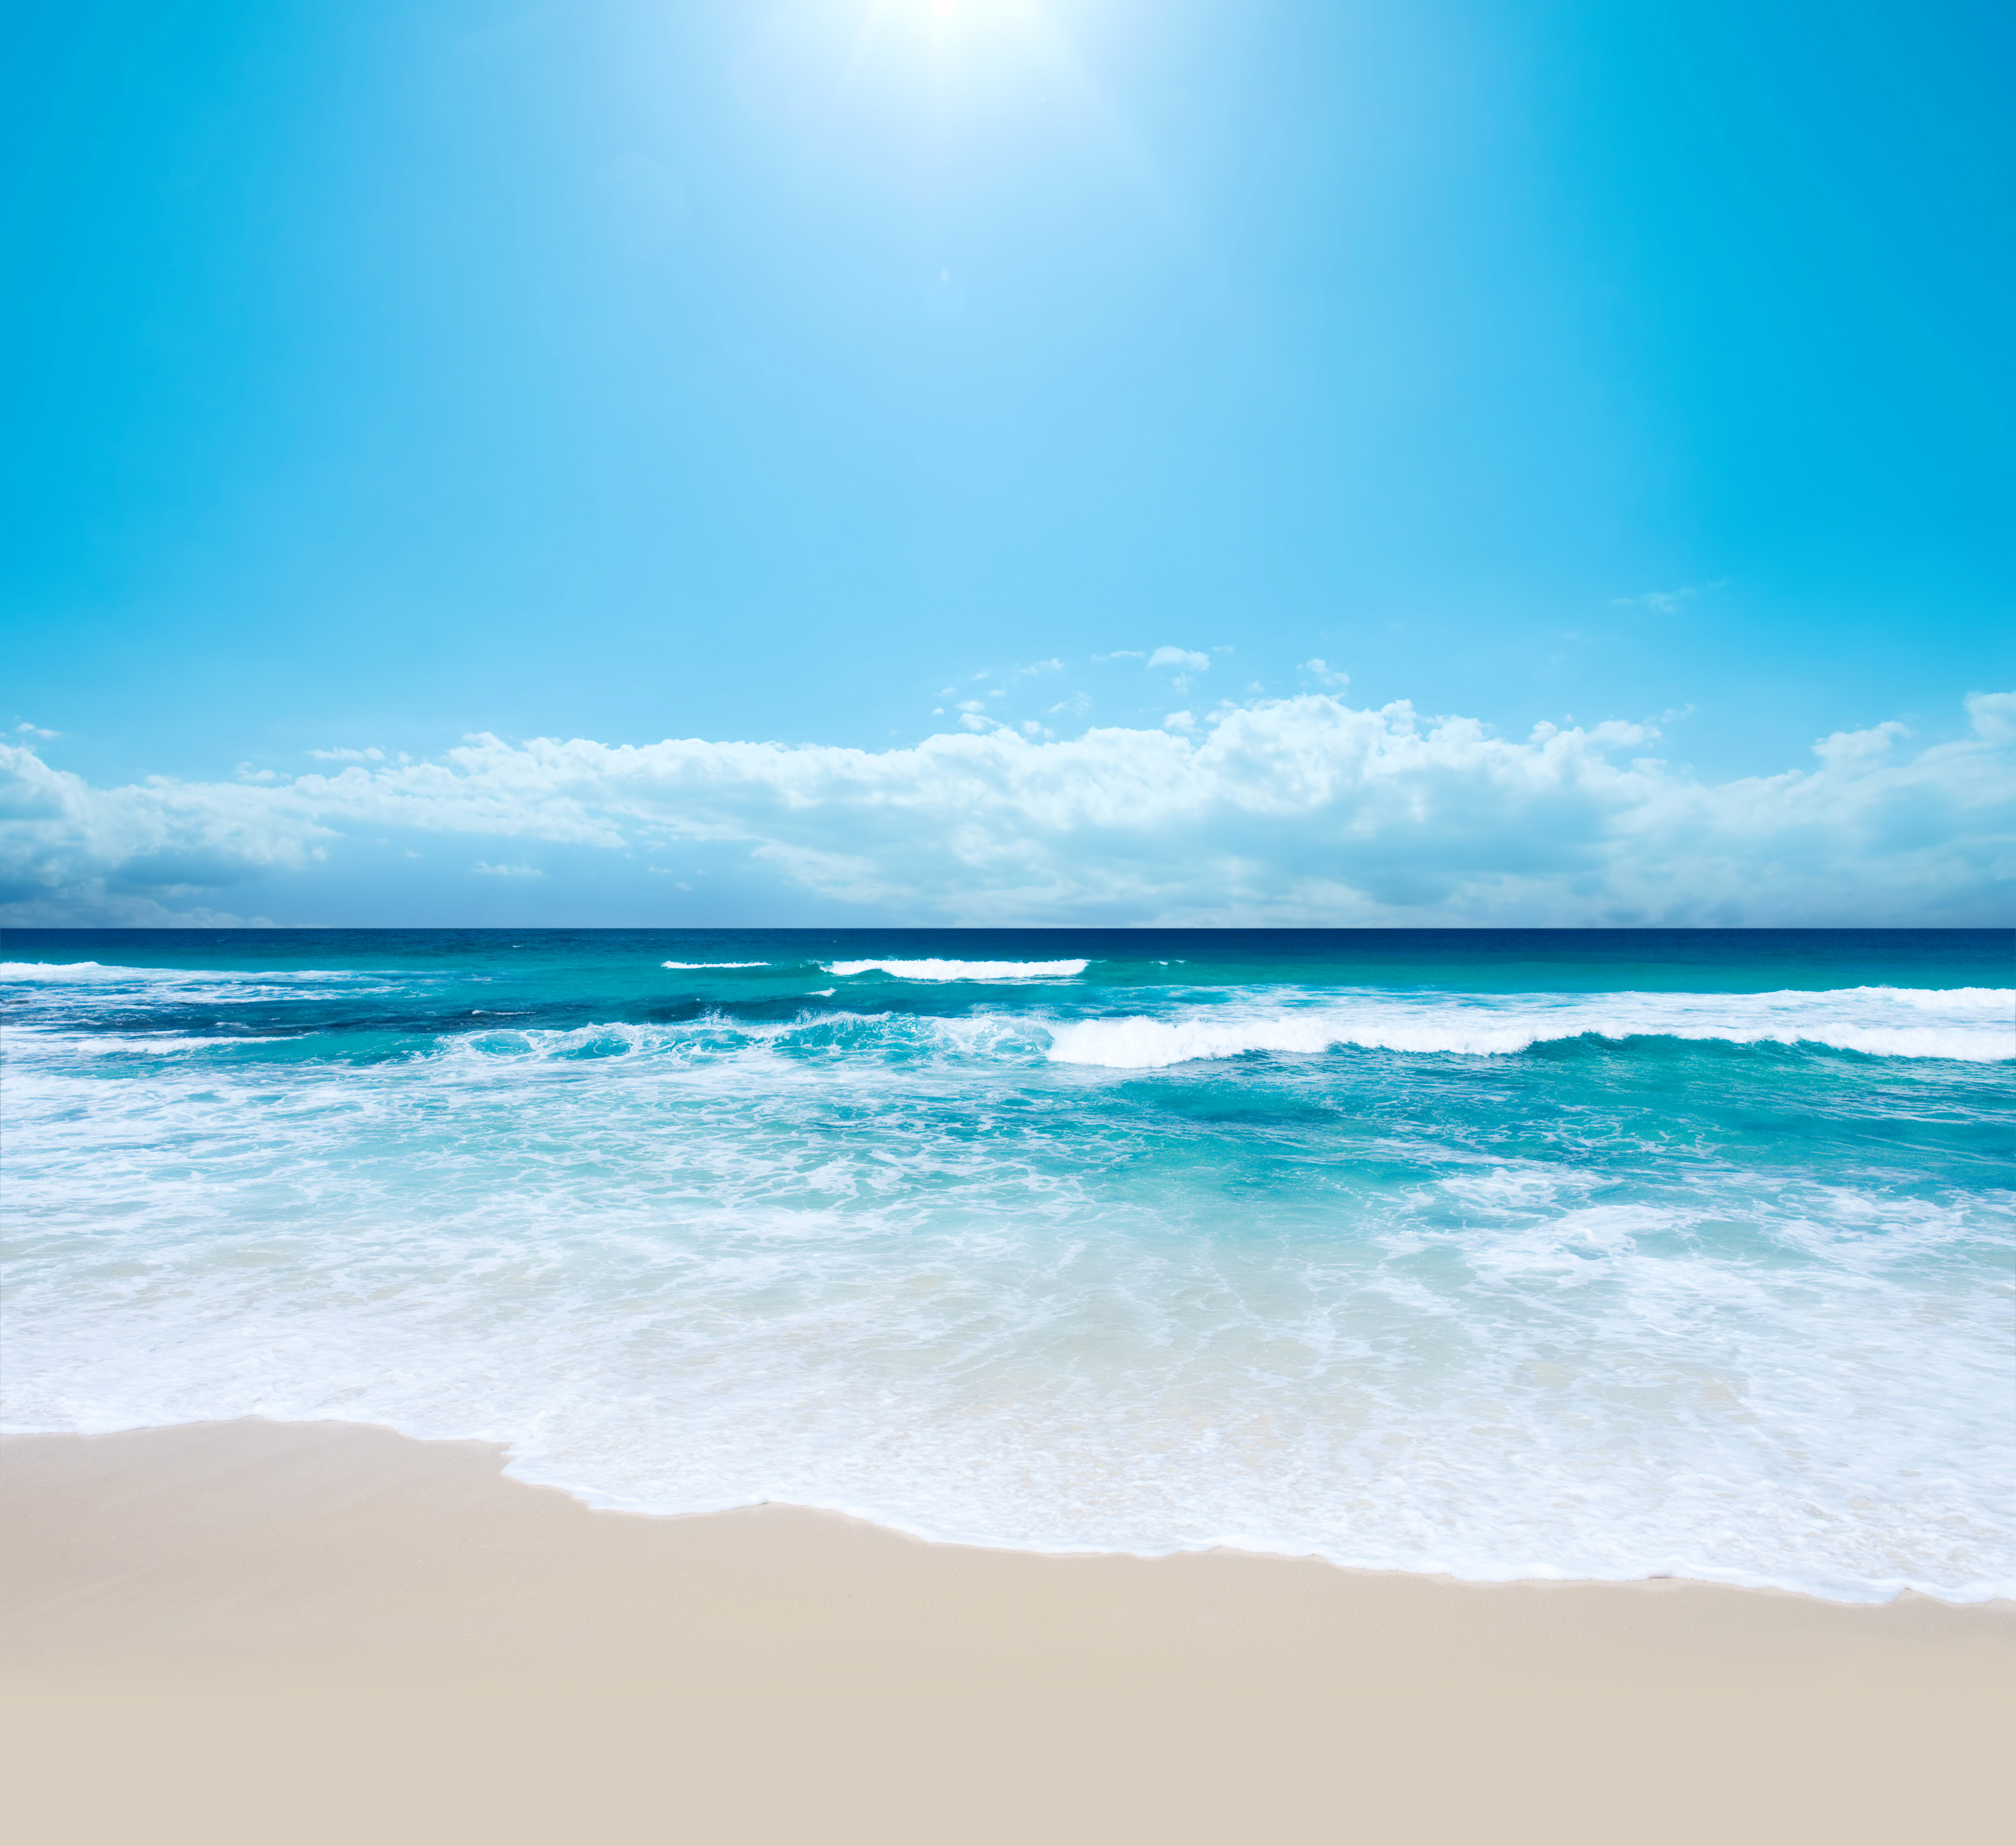 Background Sea Beach Gallery Yopriceville High Quality Image